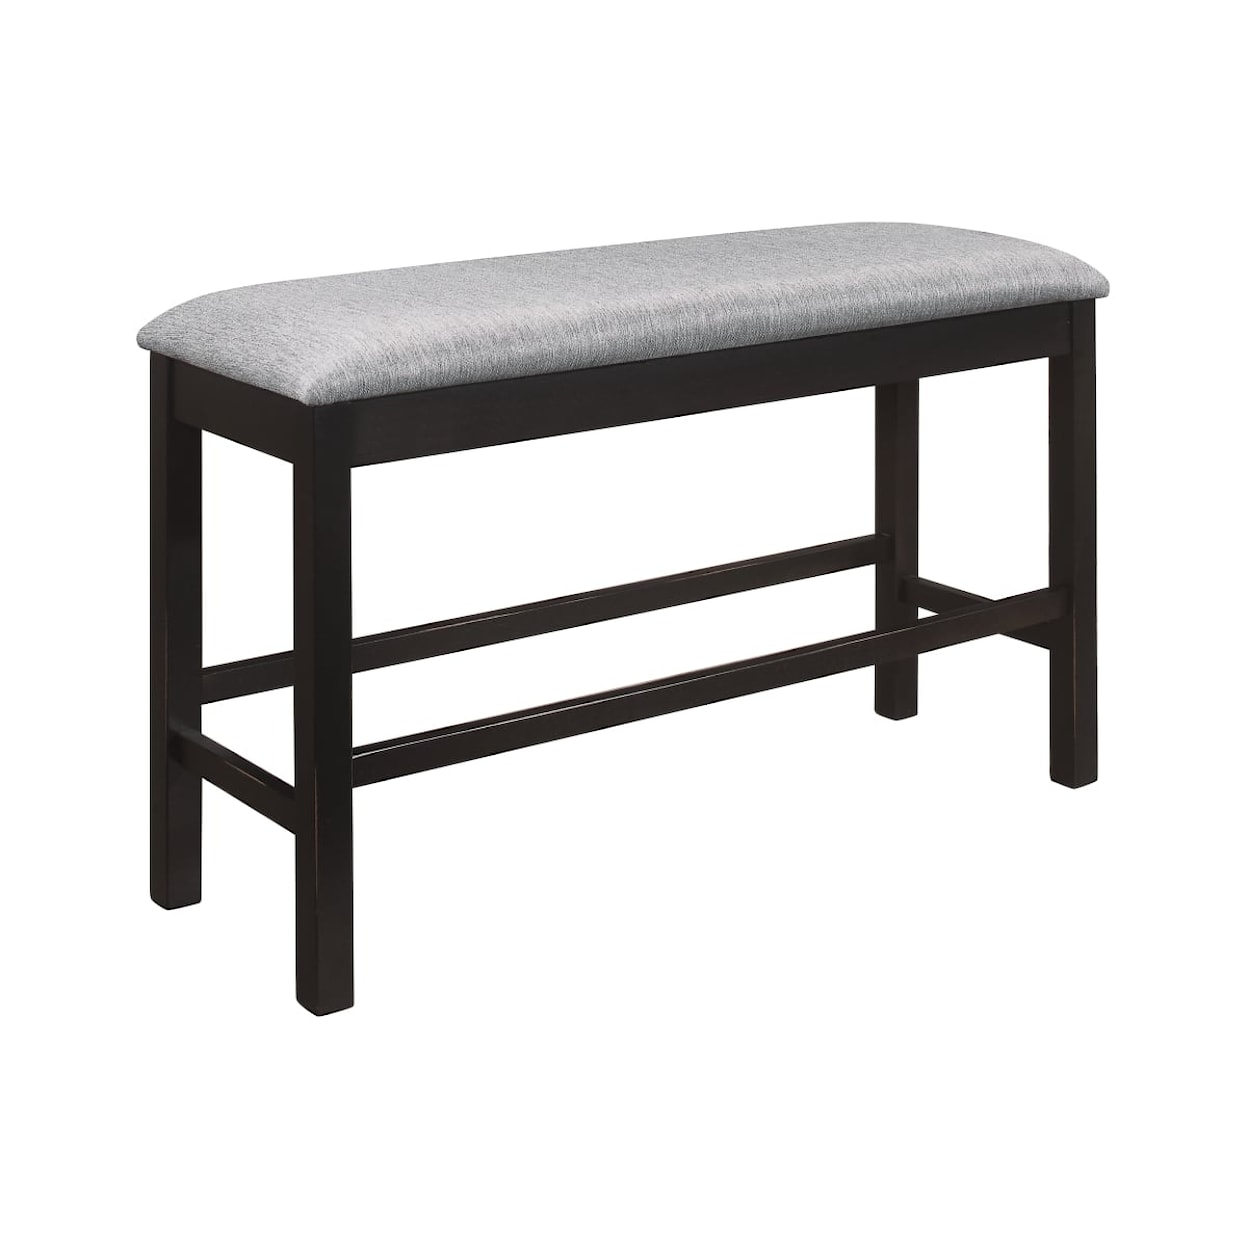 Homelegance Stratus Counter Height Bench